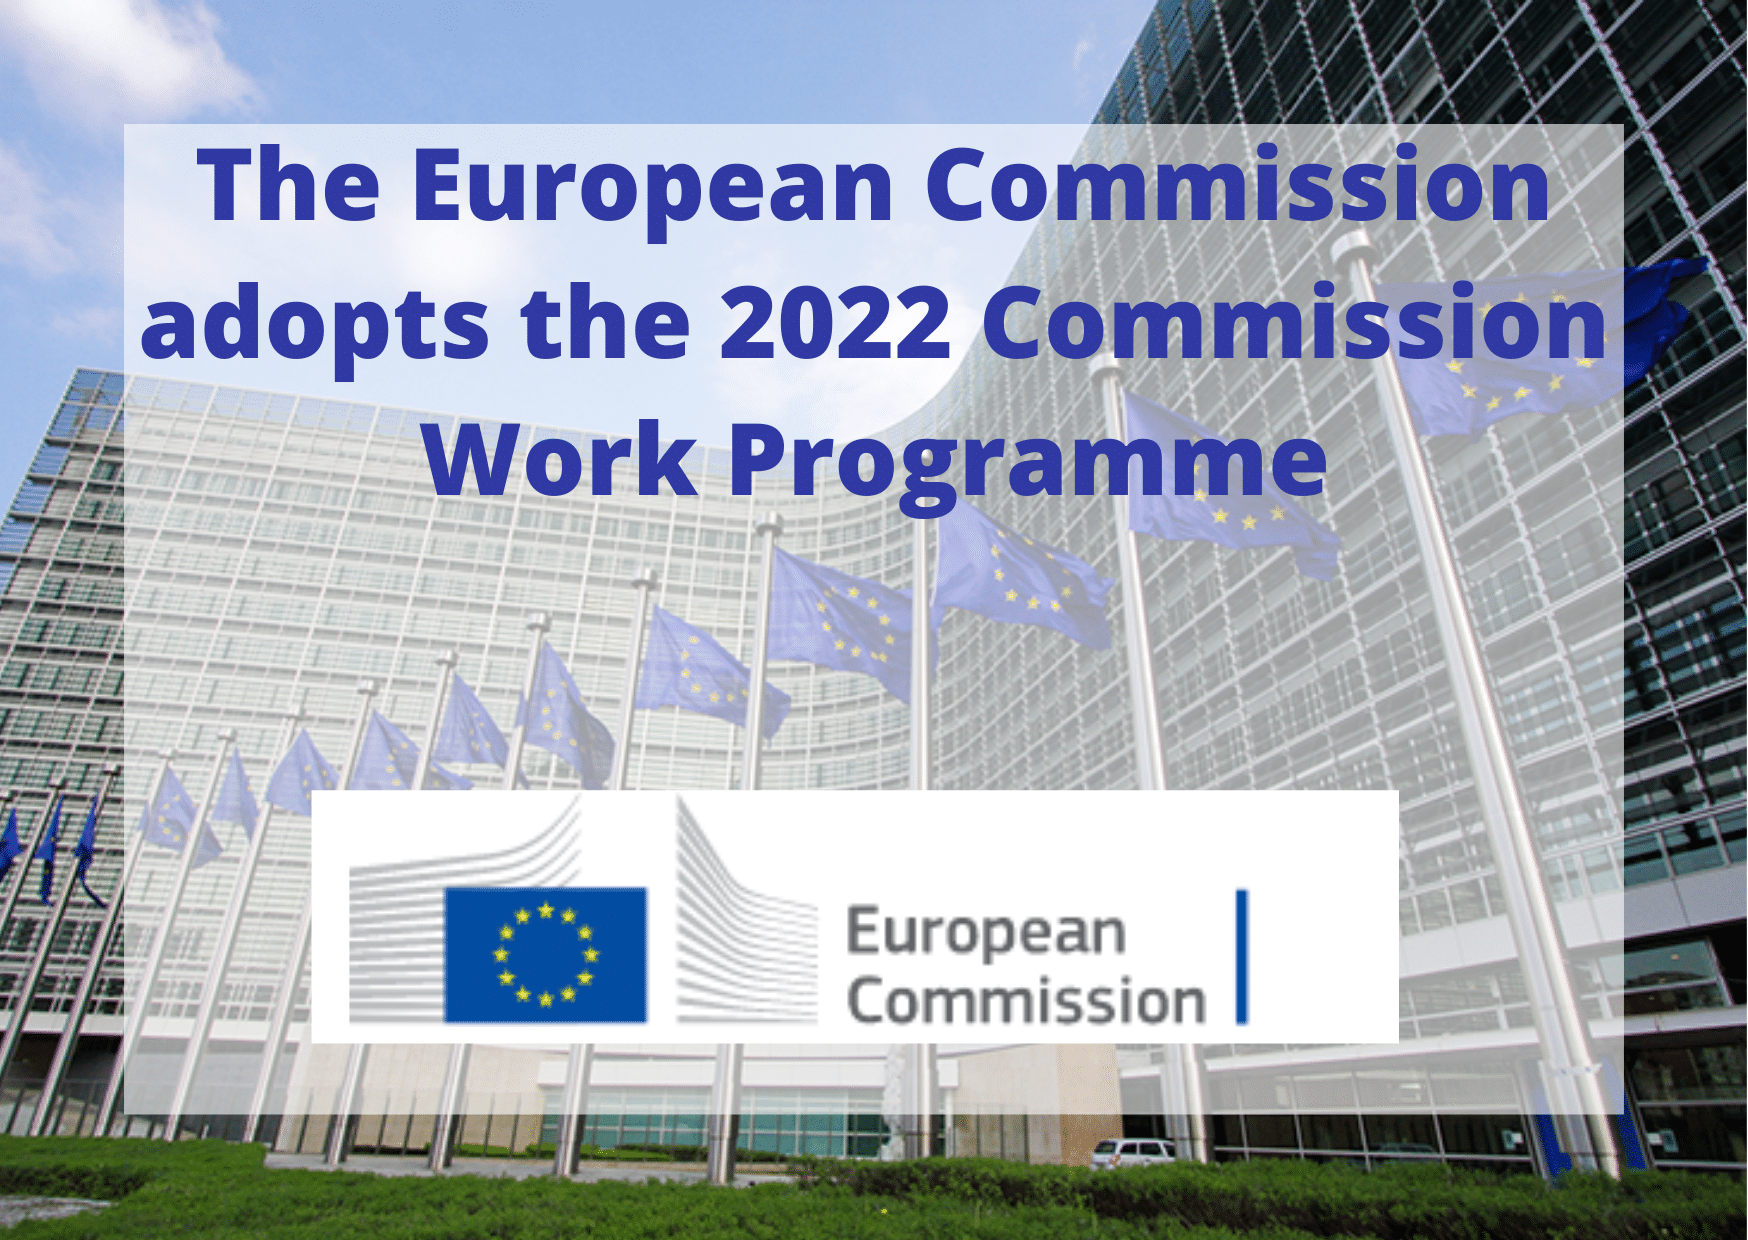 The European Commission adopts the 2022 Commission Work Programme OCTA